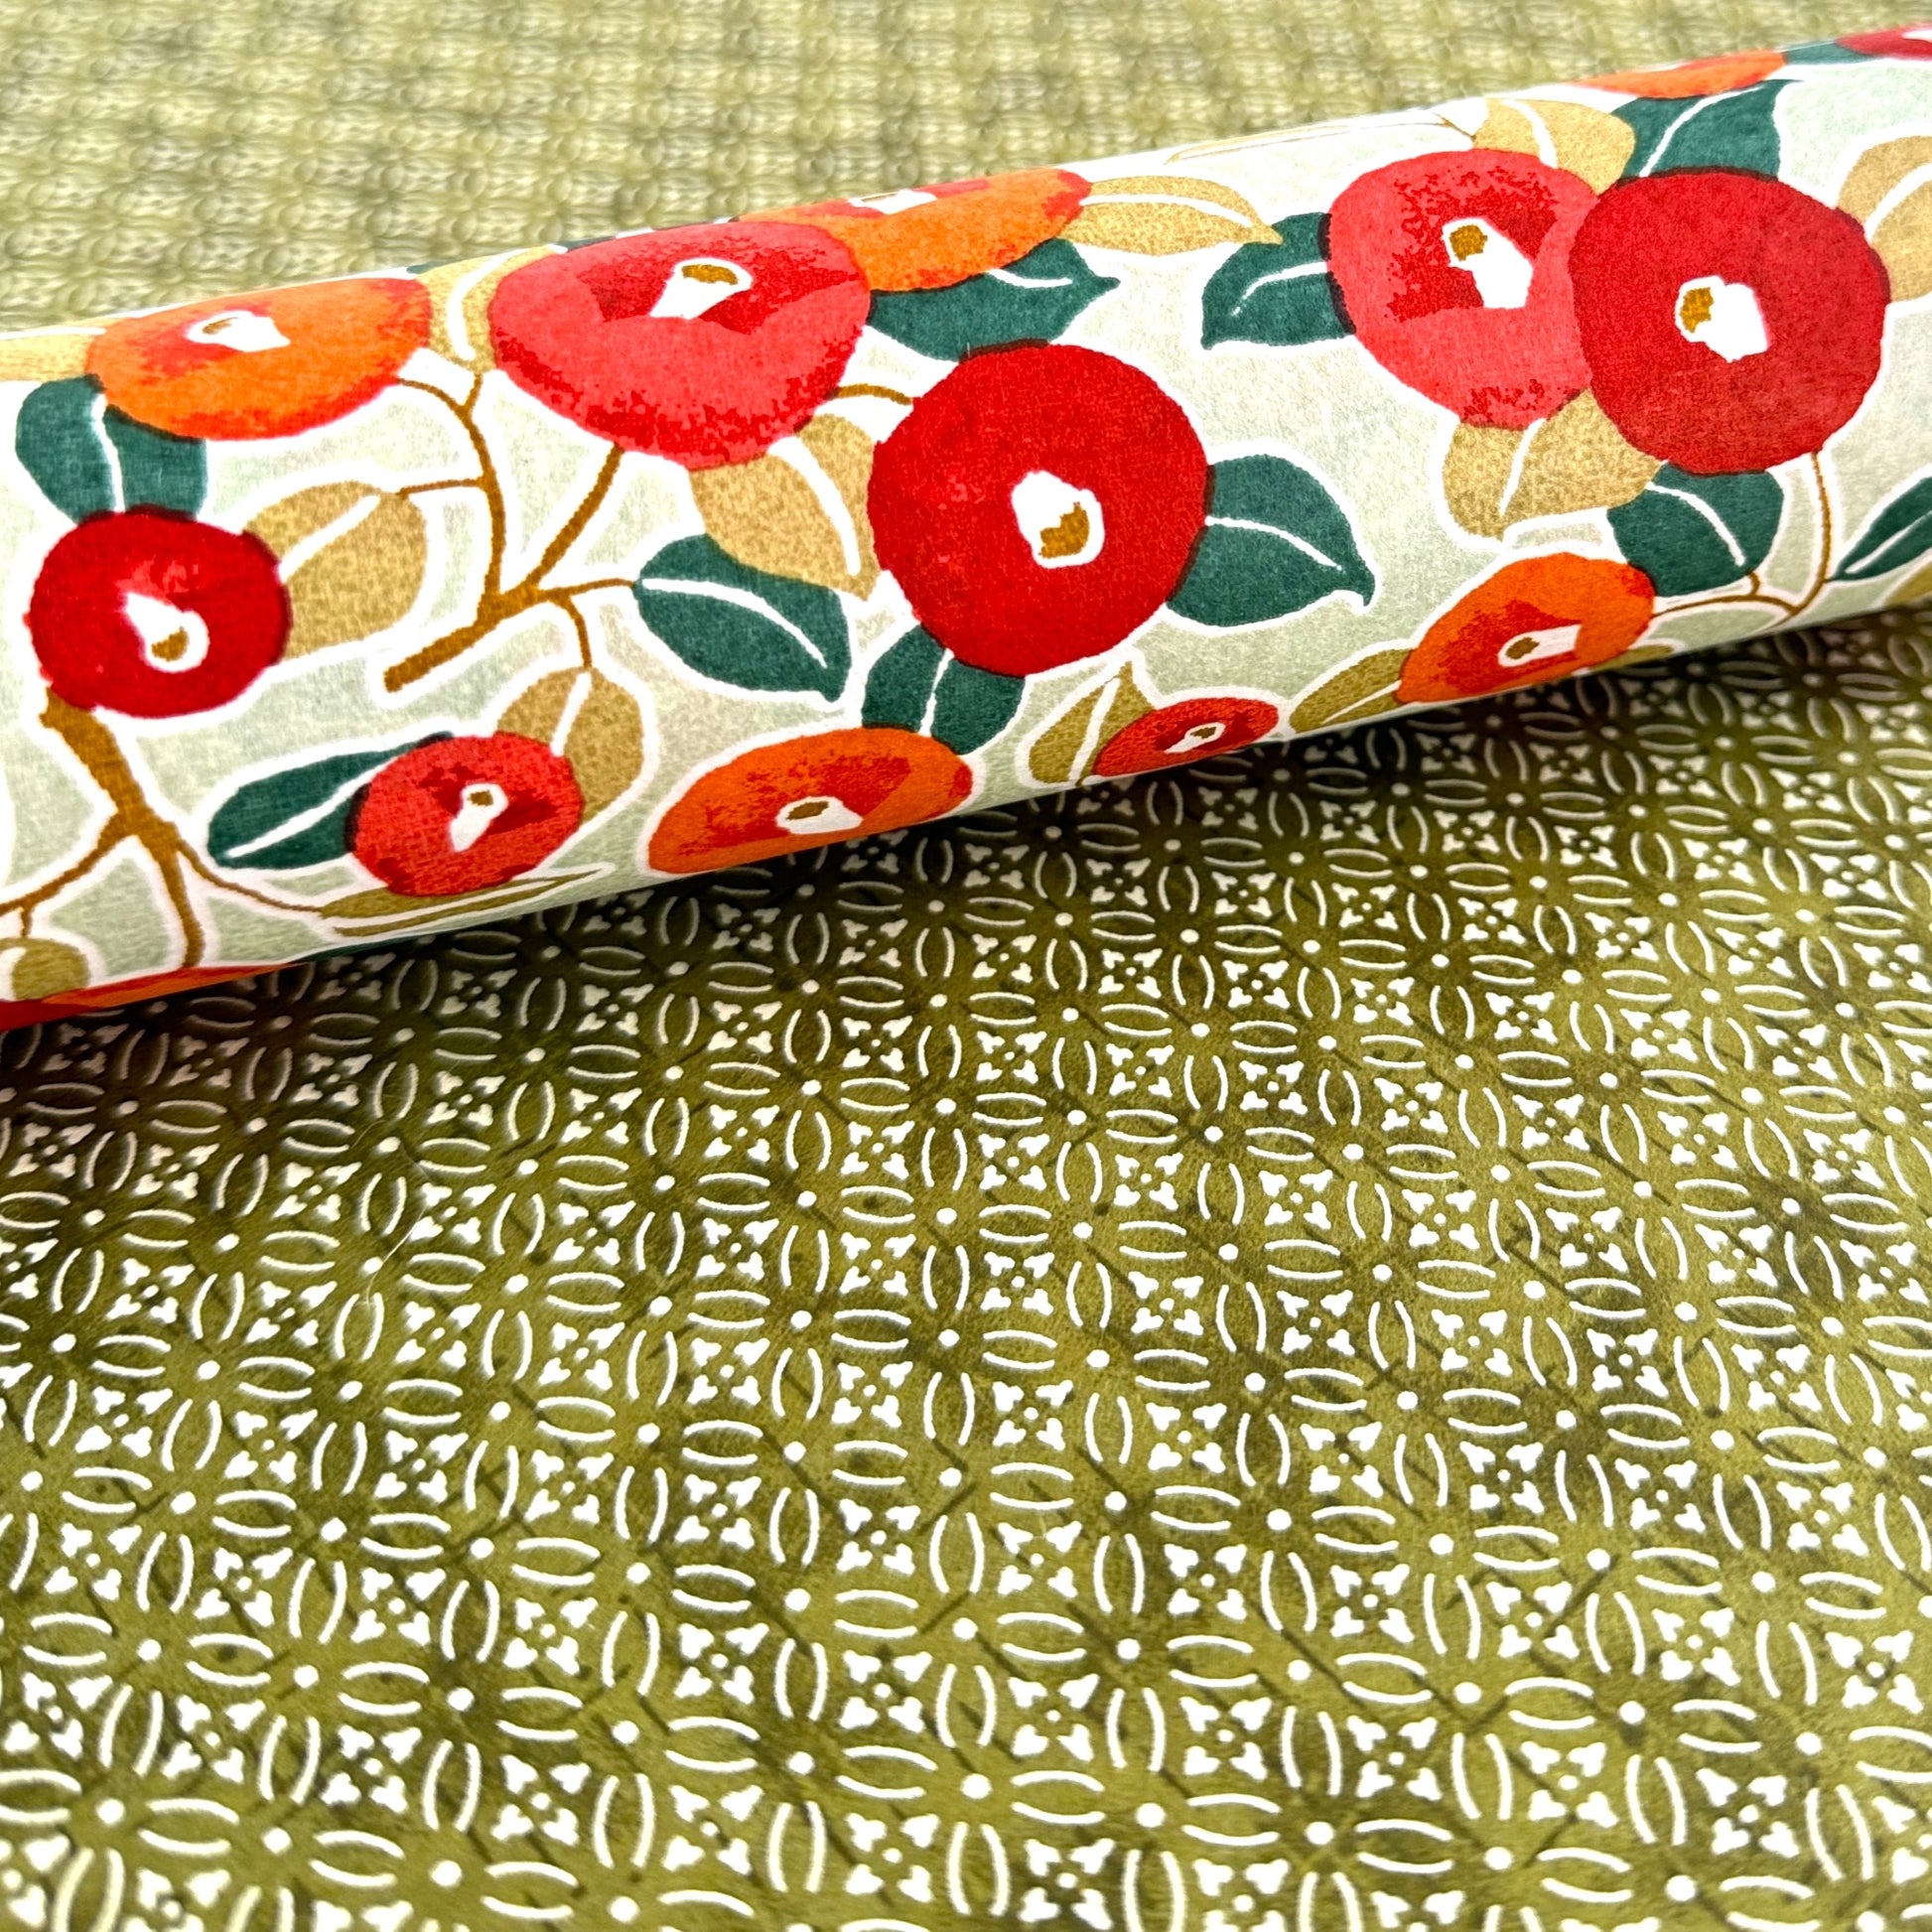 Japanese silkscreen chiyogami paper with a repeat pattern of camellia flowers in red and orange on a soft green ground, close up